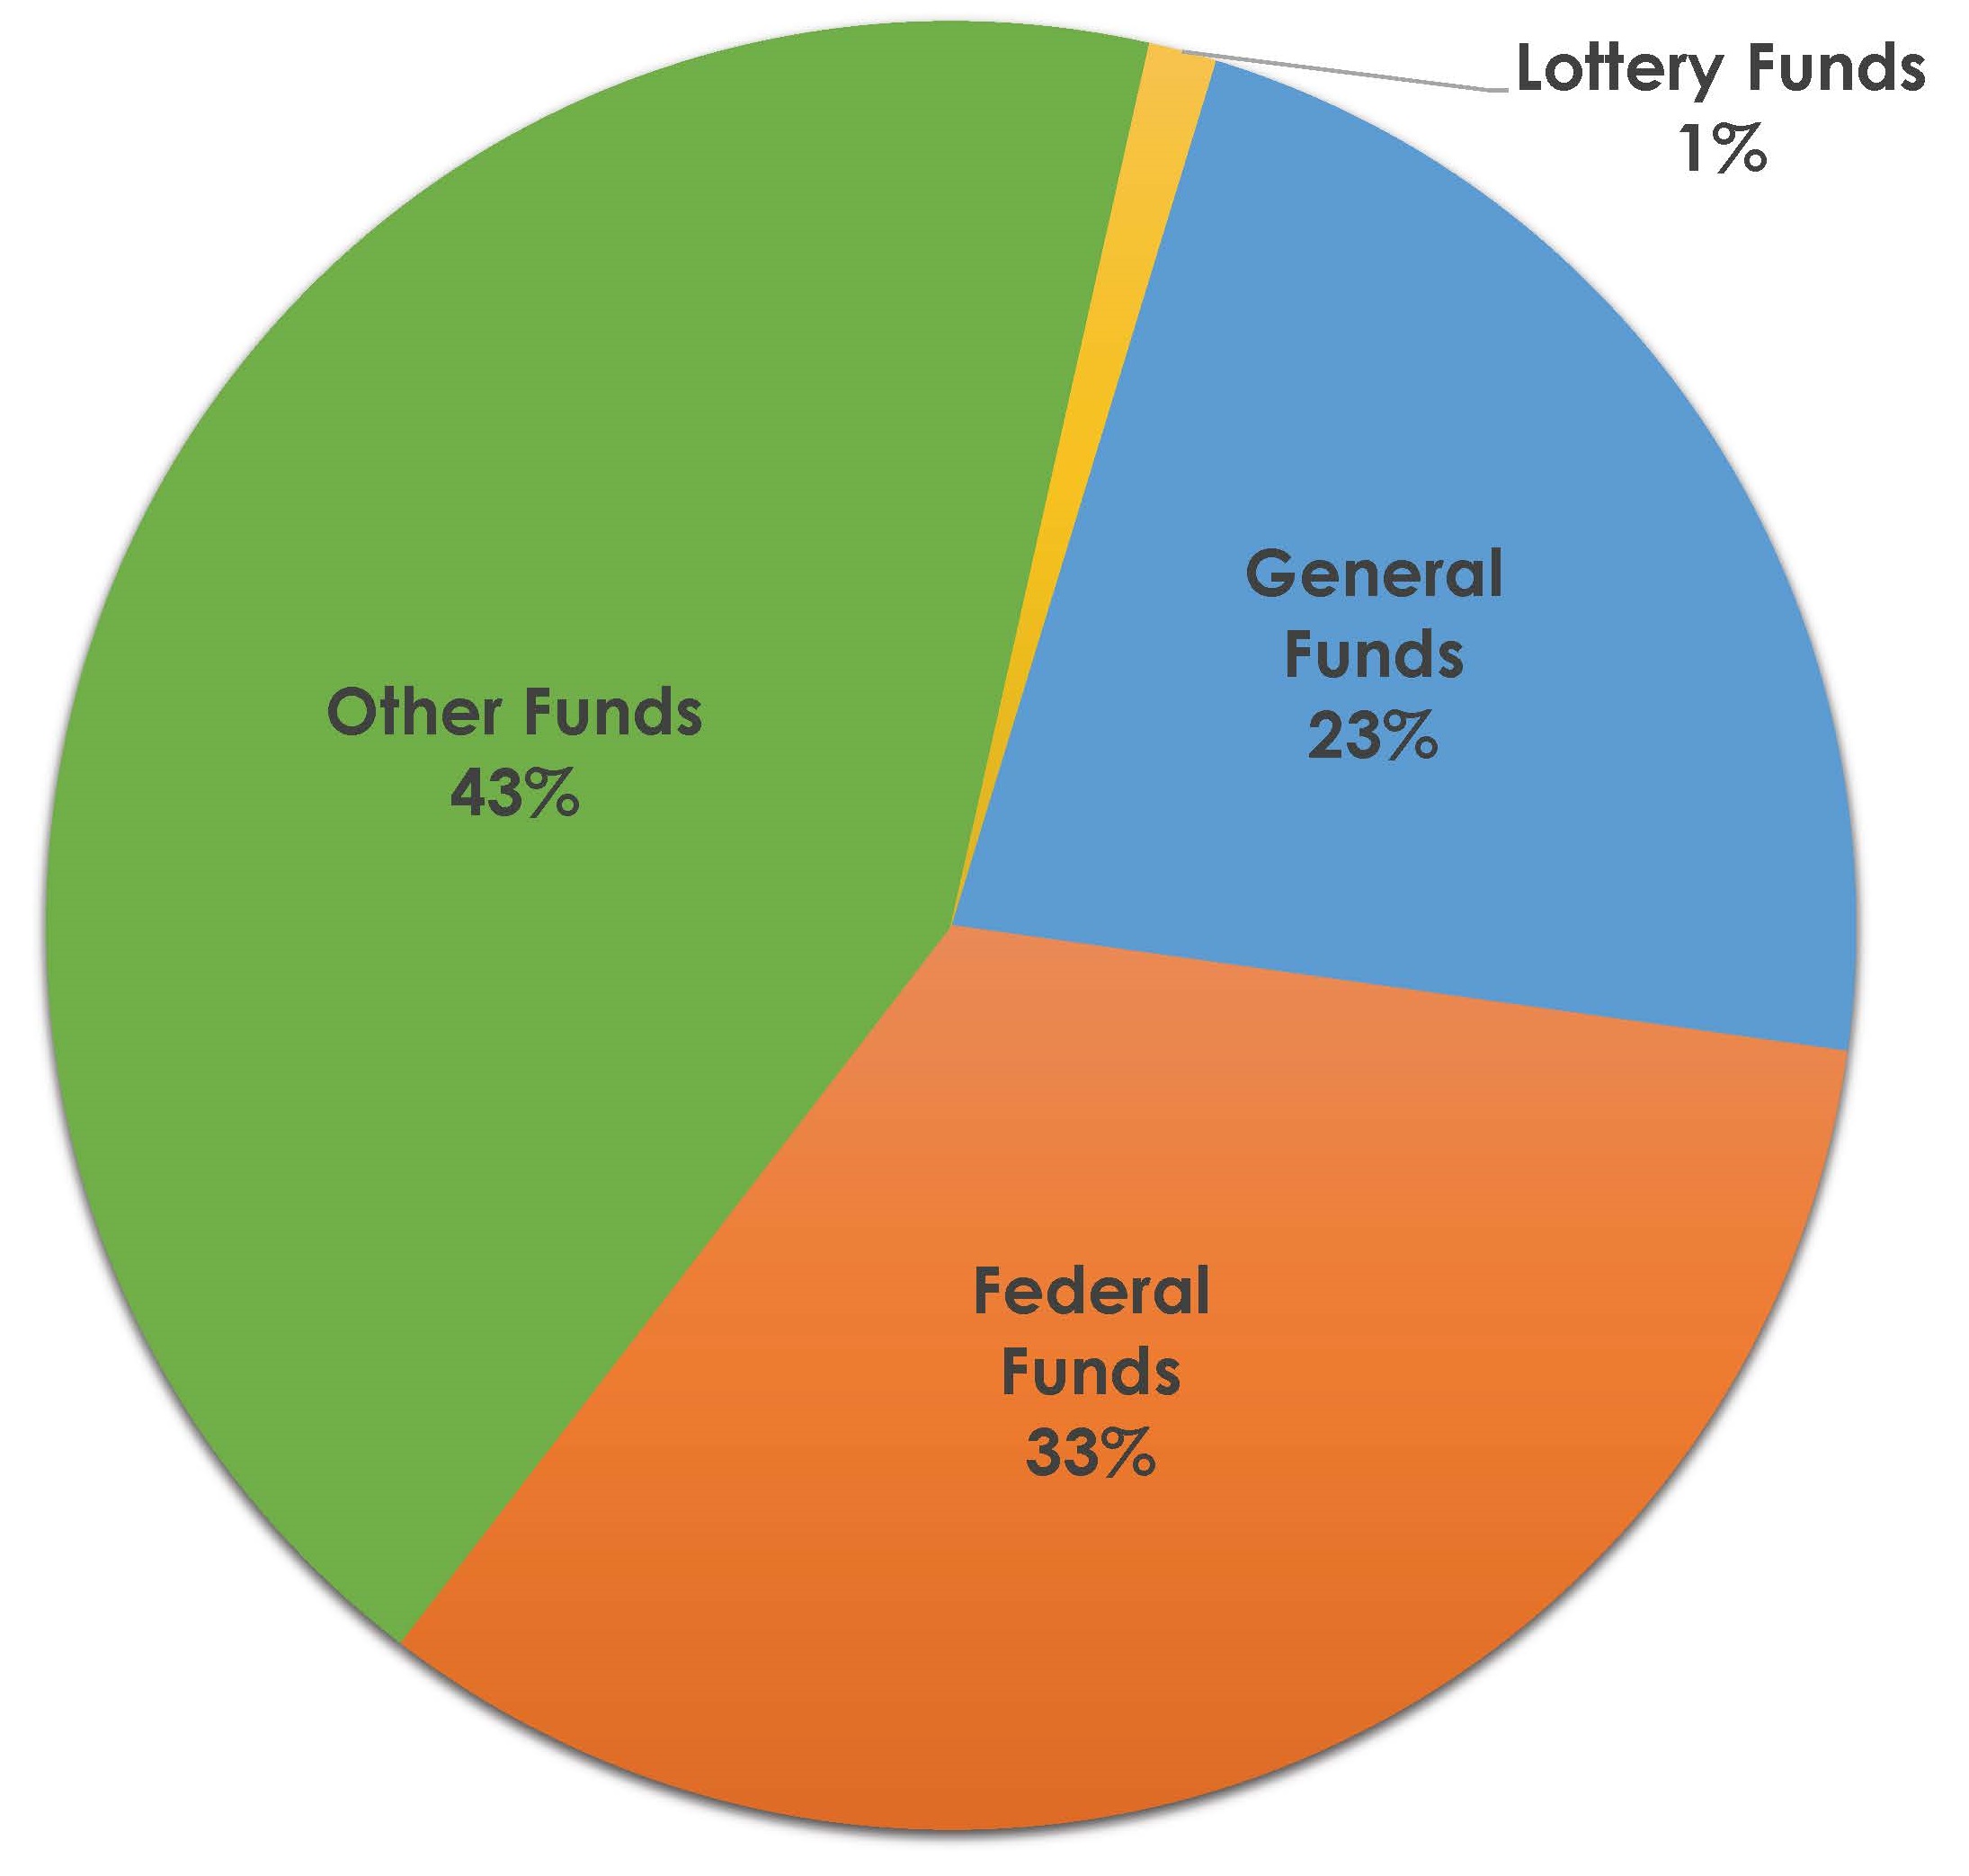 Pie chart shows Federal Funds 33%, General Funds 23%, Lottery Funds 1%, Other funds 43%